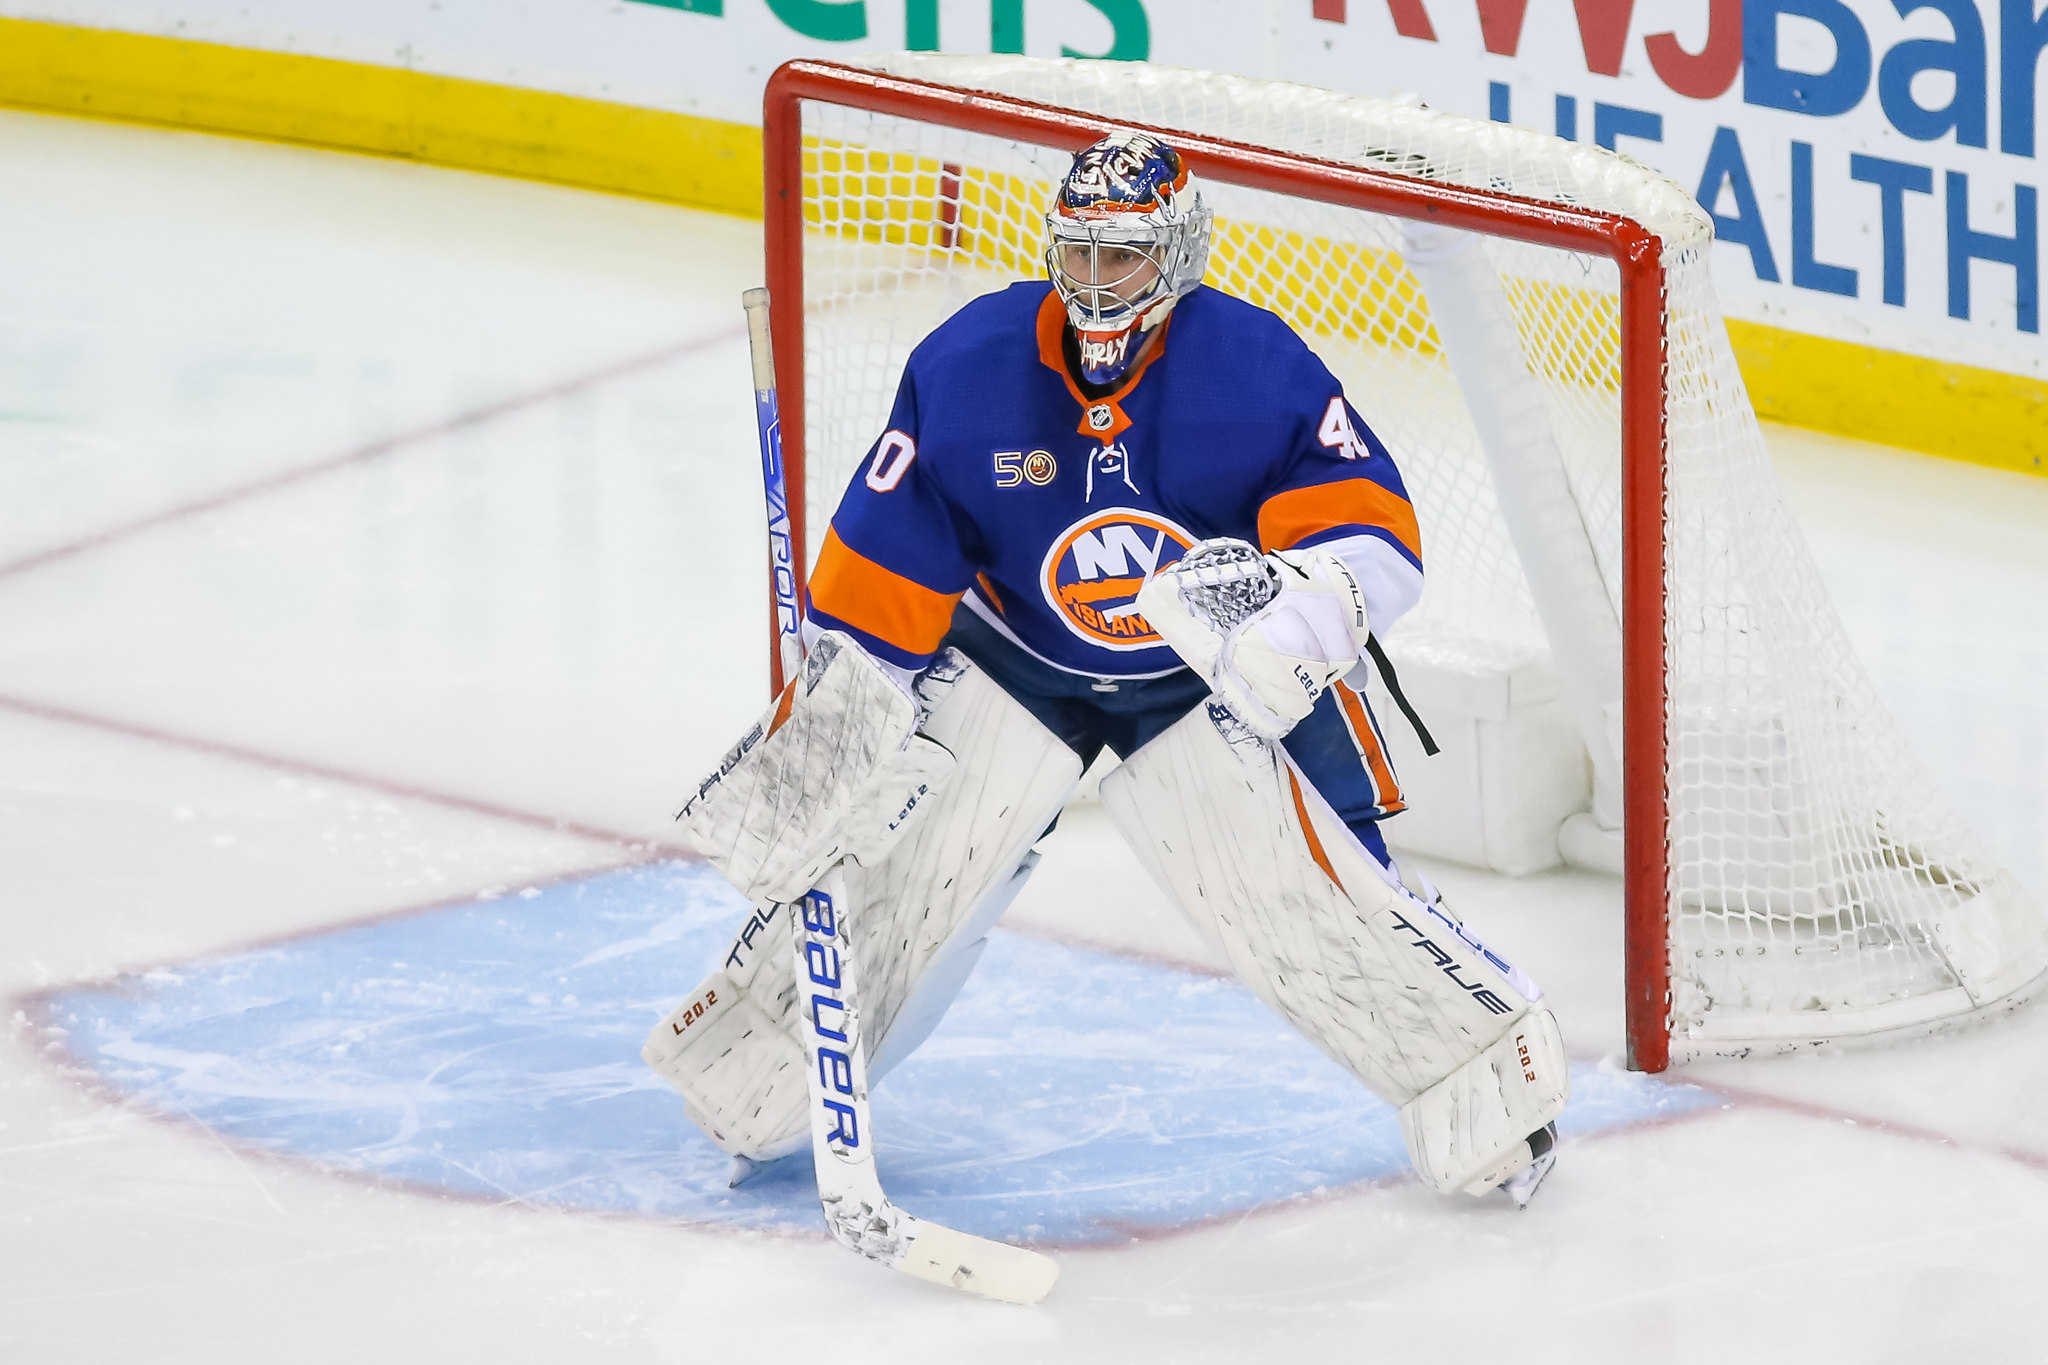 Isles Transaction: The New York Islanders have signed goaltender Semyon  Varlamov to a four-year contract. More through the link in our…